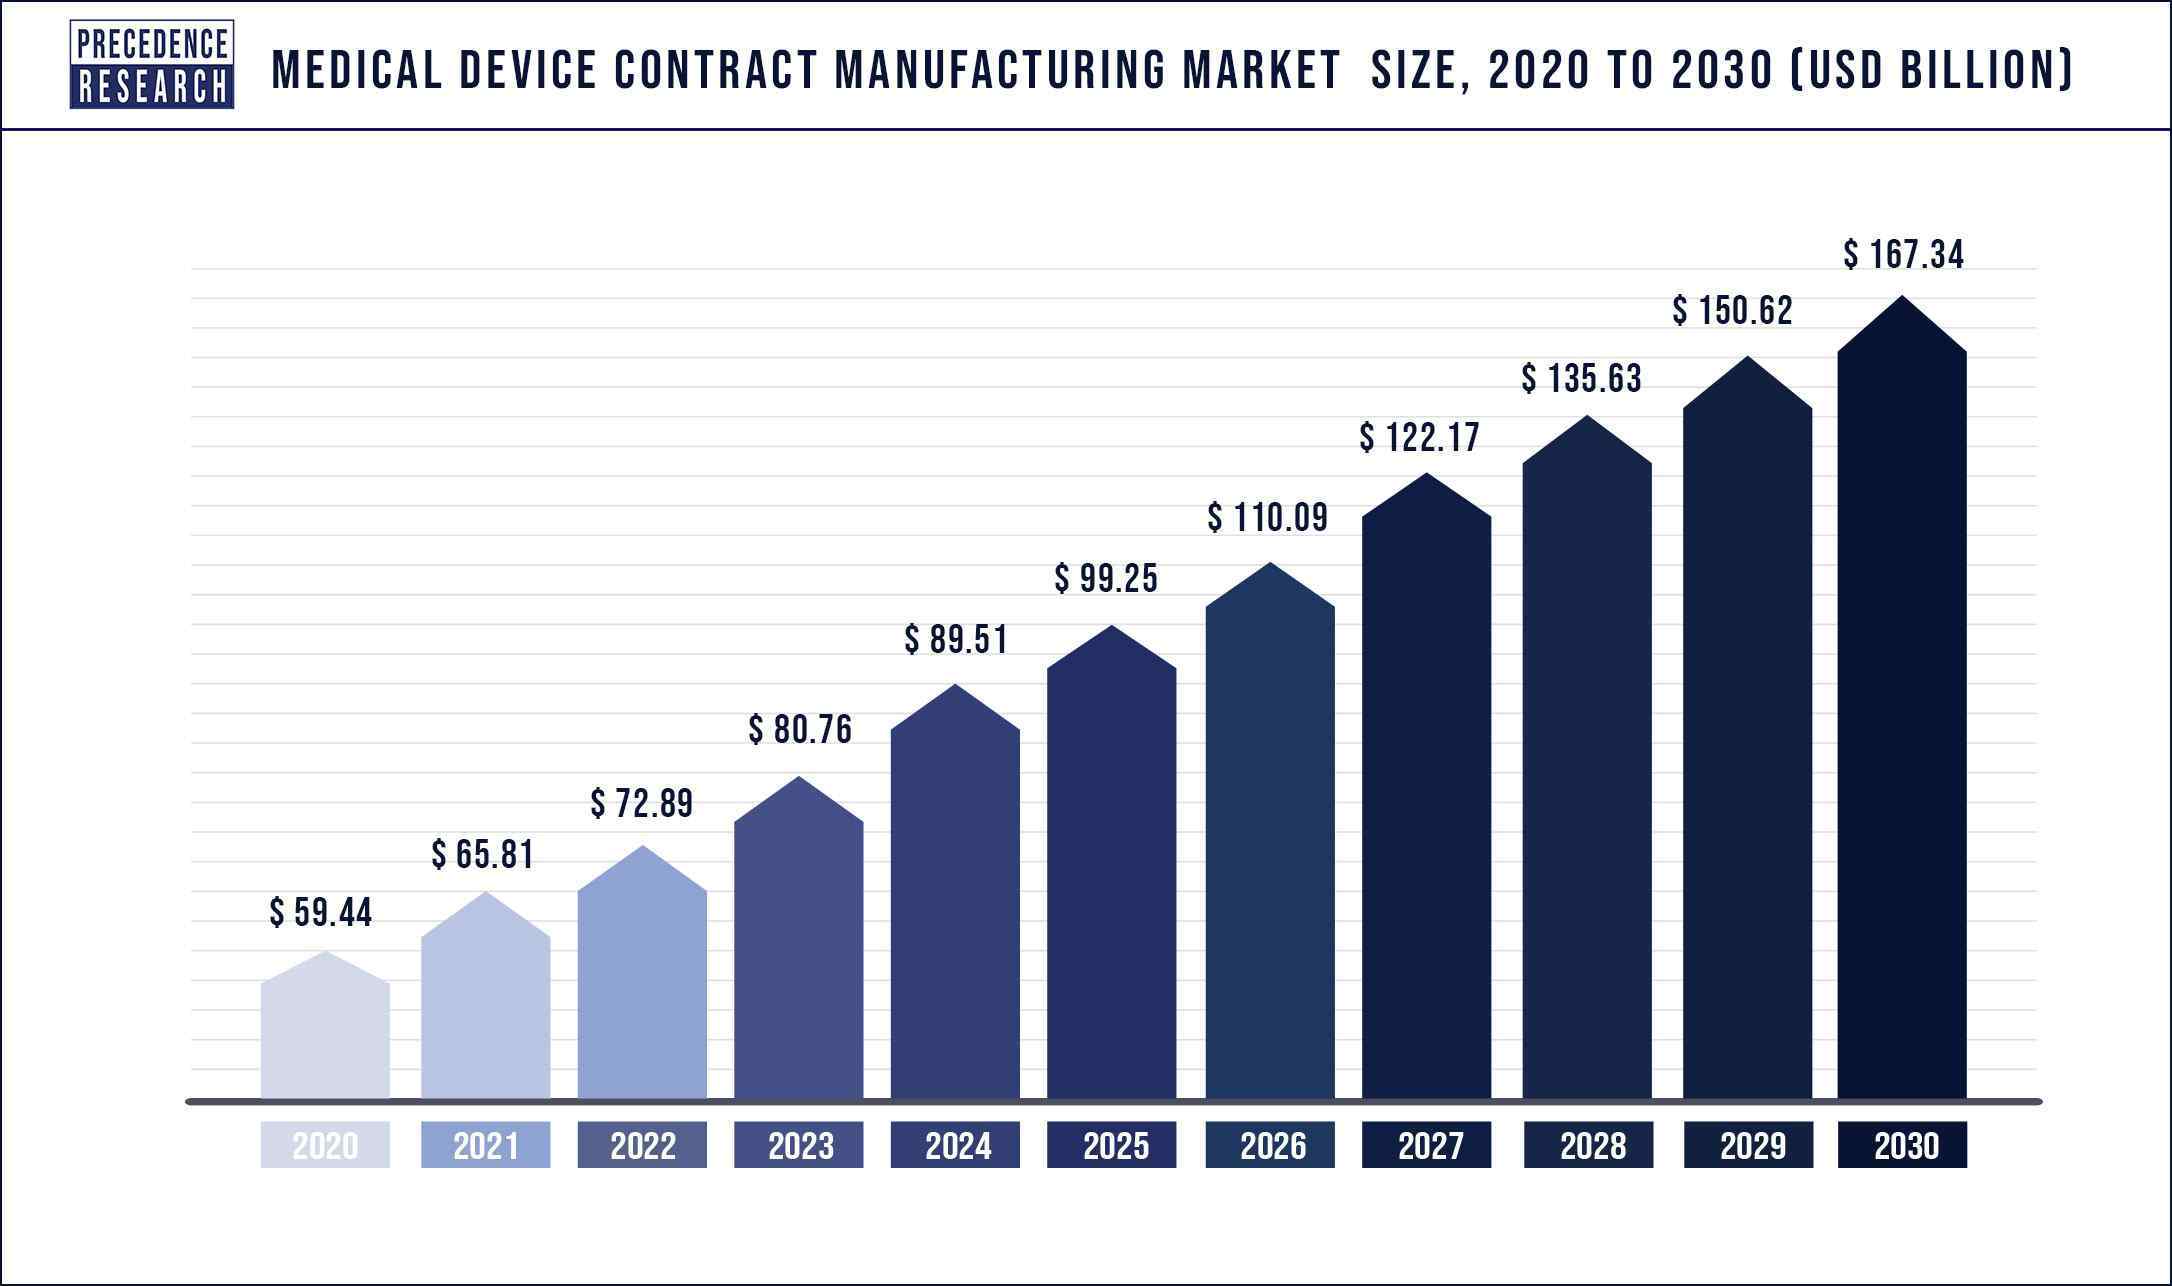 Medical Device Contract Manufacturing Market Size 2020 to 2030